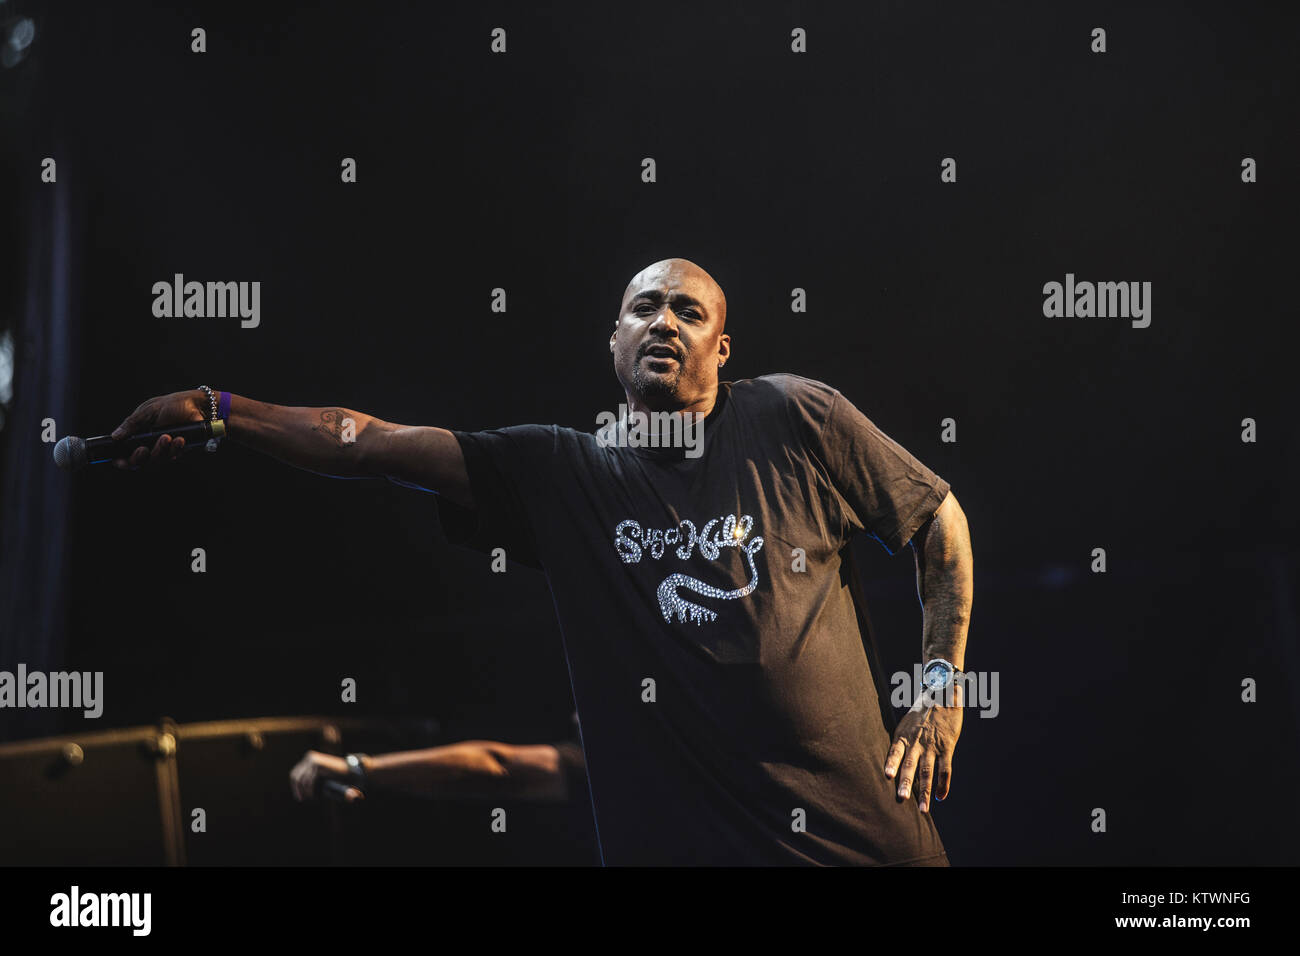 The American hip hop and rap group The Sugarhill Gang performs a live concert at the Danish music festival Vanguard Music Festival 2015 in Copenhagen. Denmark, 01/08 2015. Stock Photo